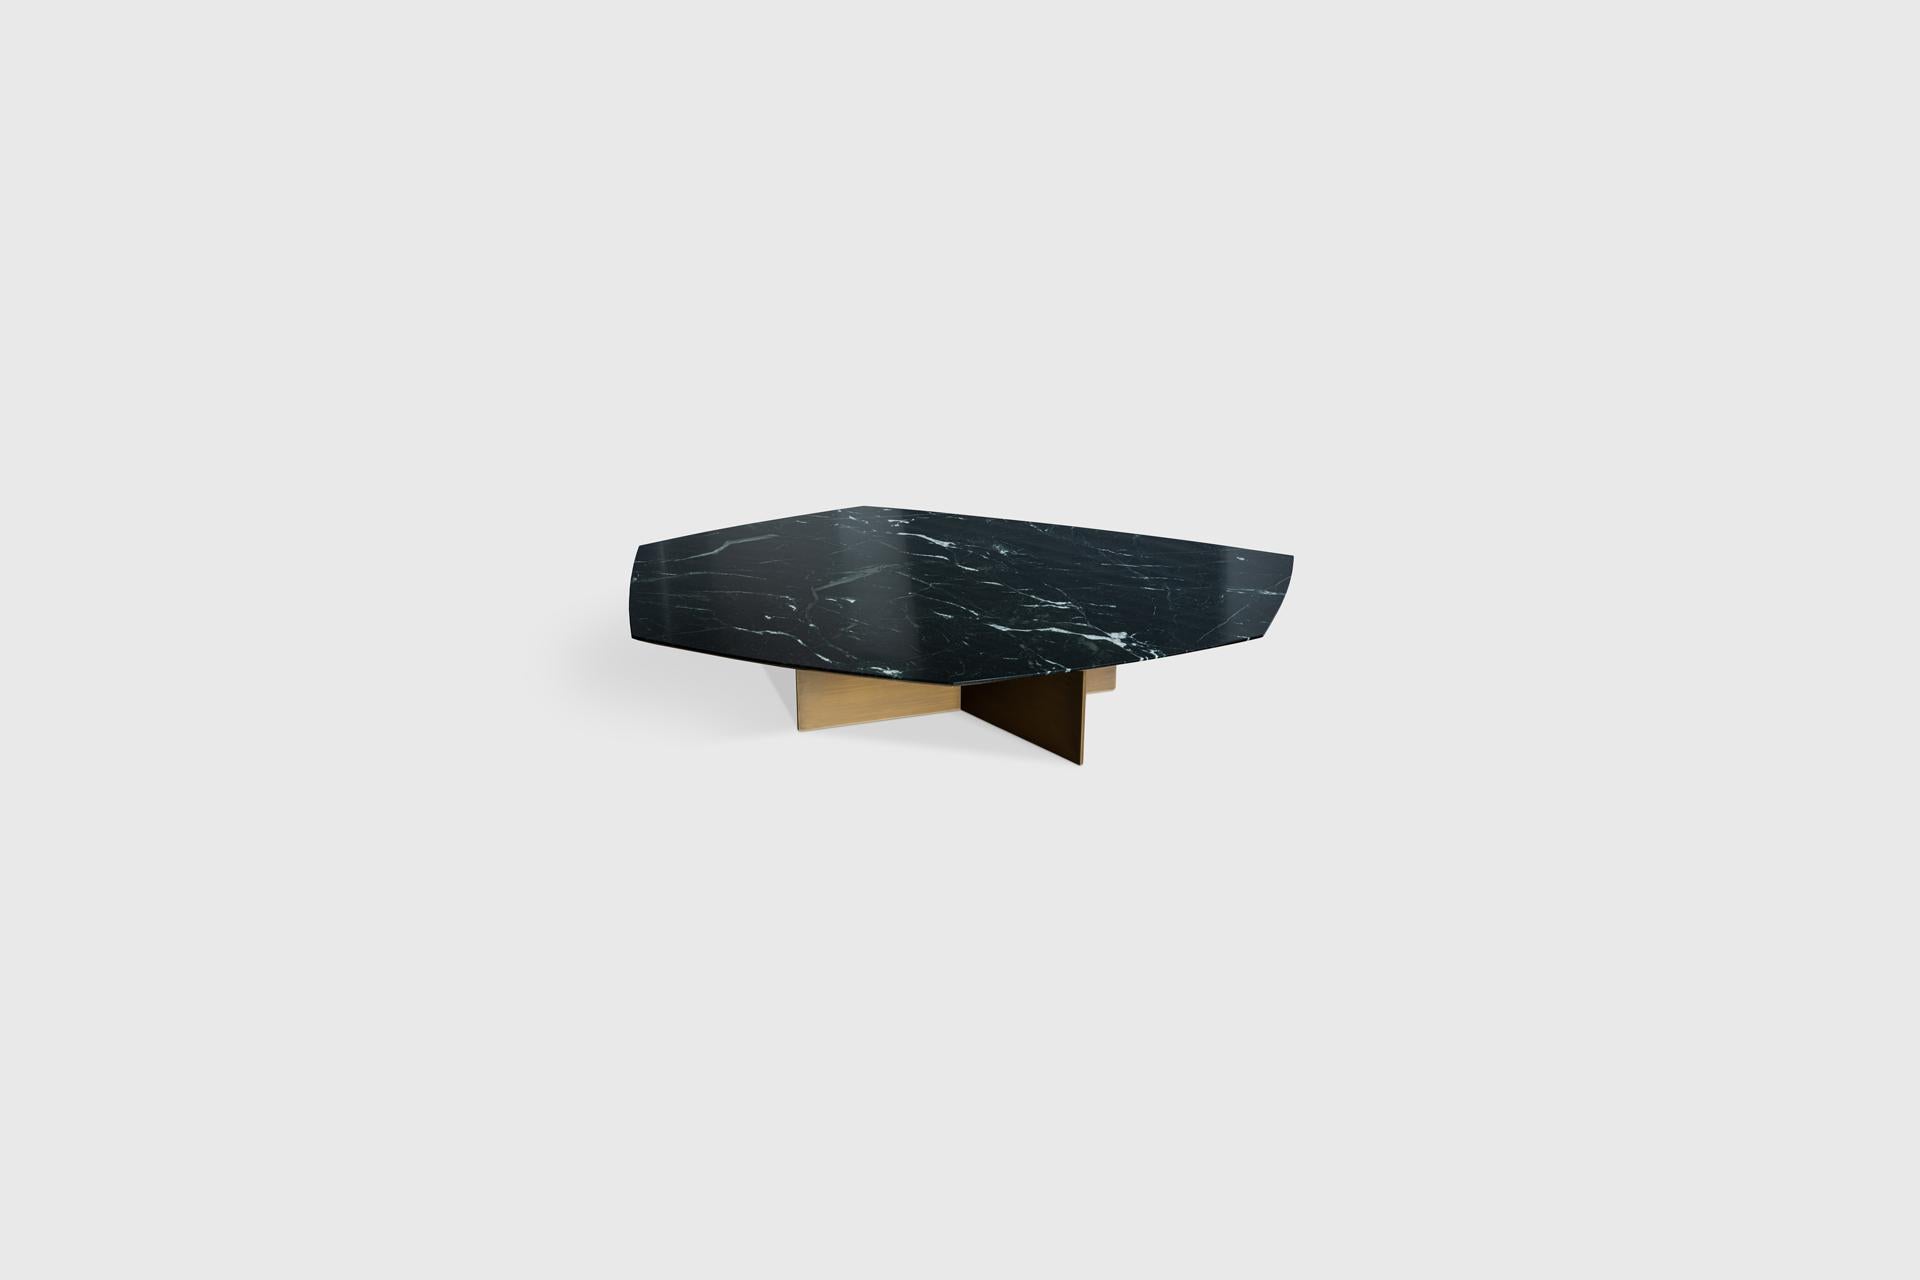 Geometrik Negro Monterrey Stone and Brass Large Coffee Table by Atra Design
Dimensions: D 120 x W 180 x H 32 cm.
Materials: Negro Monterrey stone and brass.

Available in three sizes. Different marble options available: Verde Tikal, Negro Monterrey,